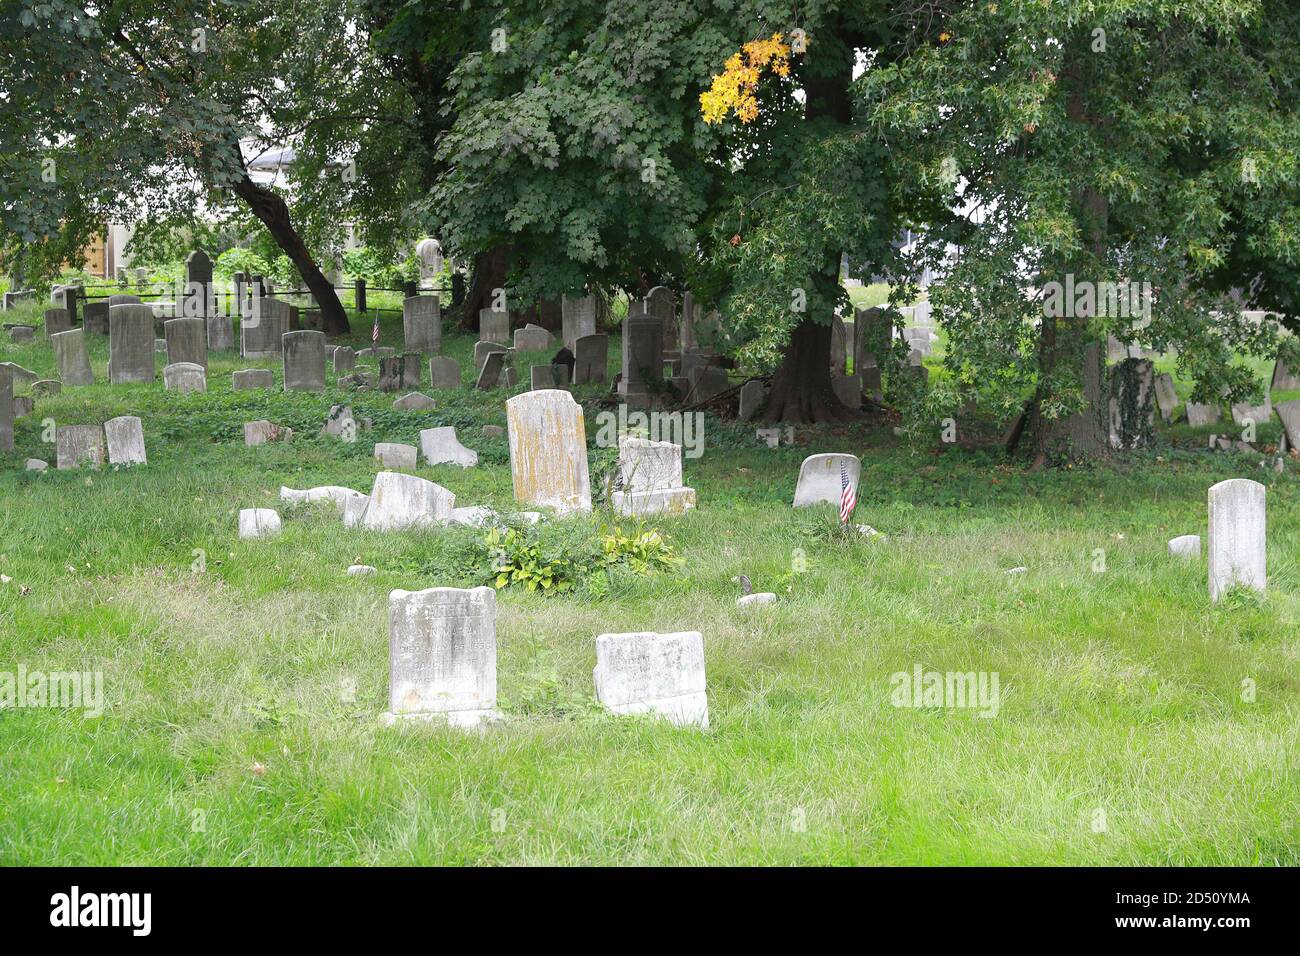 Markers that have weathered elements and time in the graveyard at the Reformed Church in the historic Port Richmond section of Staten Island, N,Y. Stock Photo